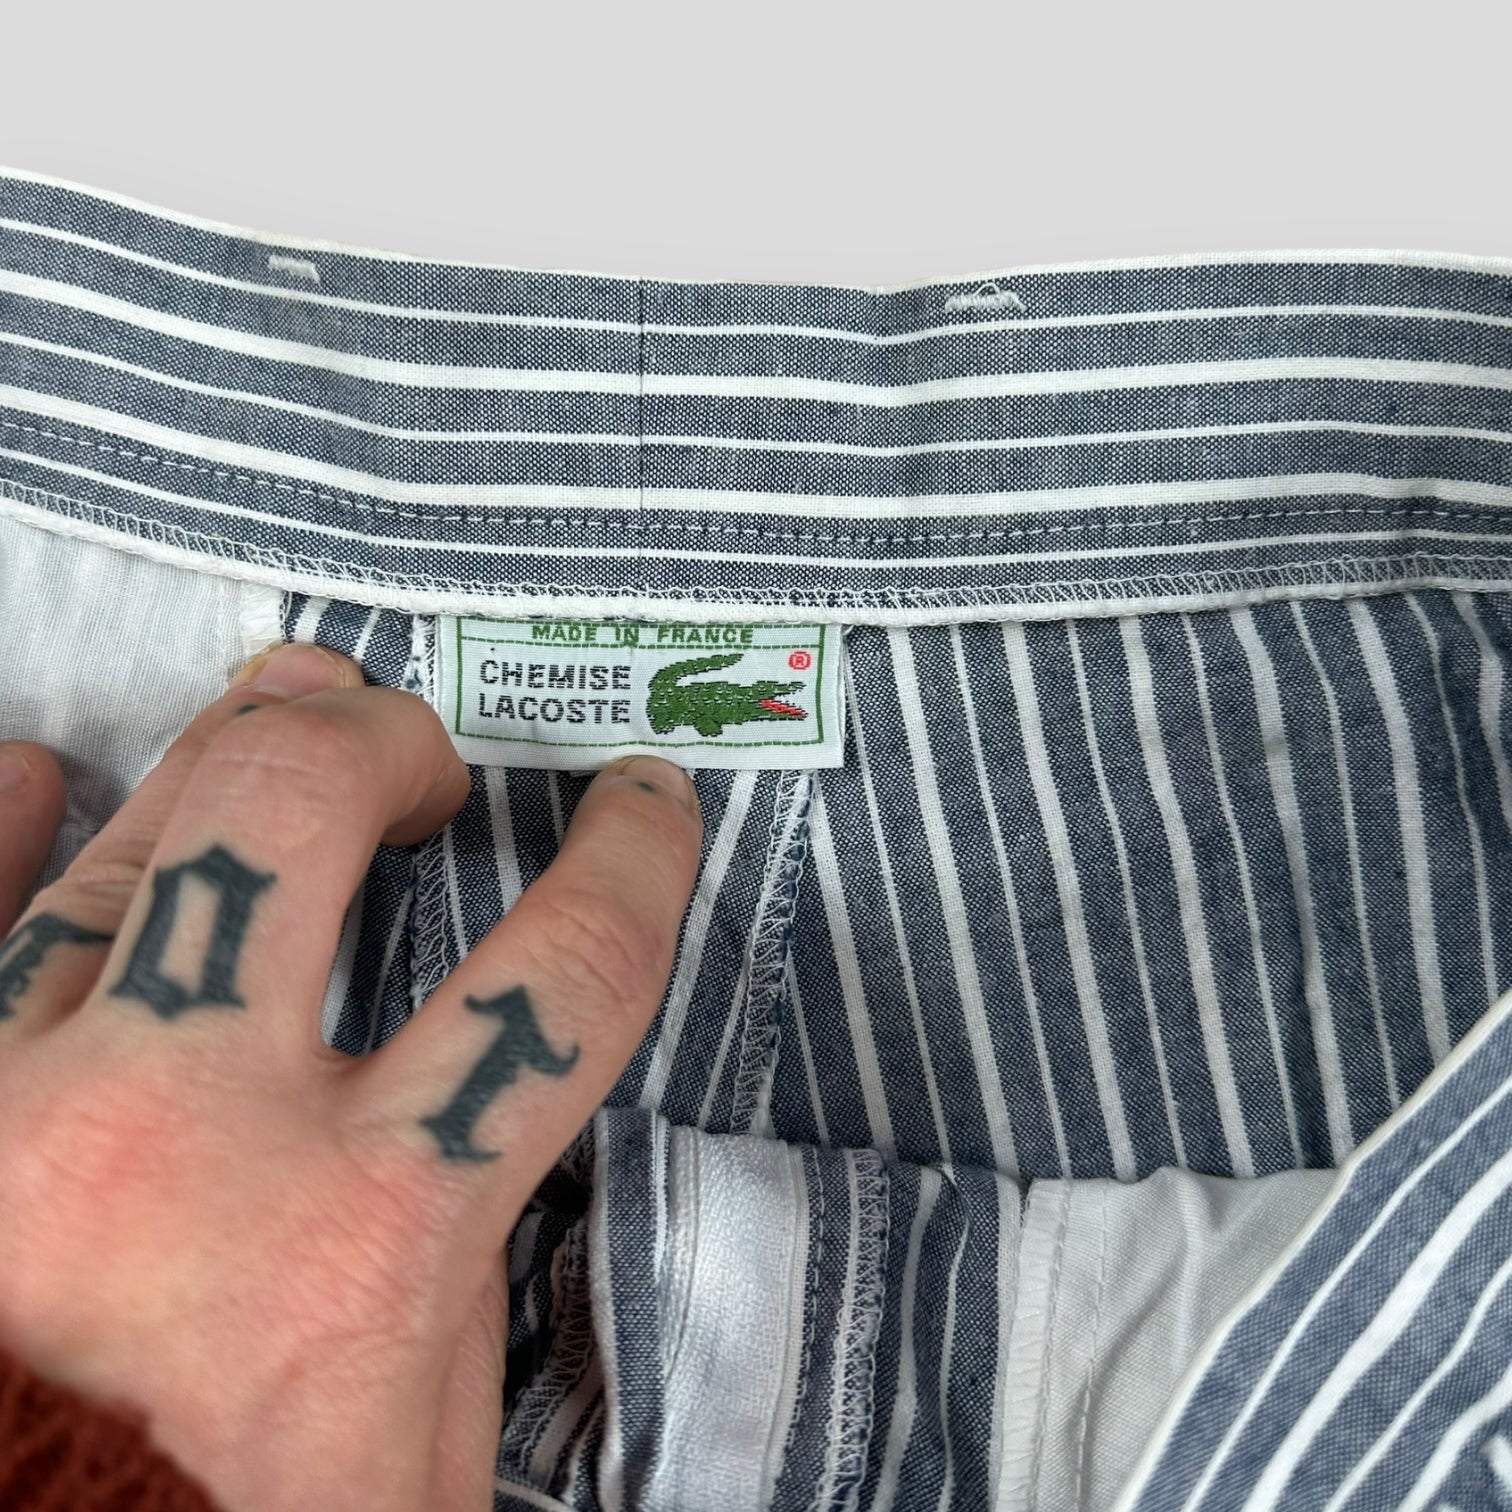 Lacoste trousers